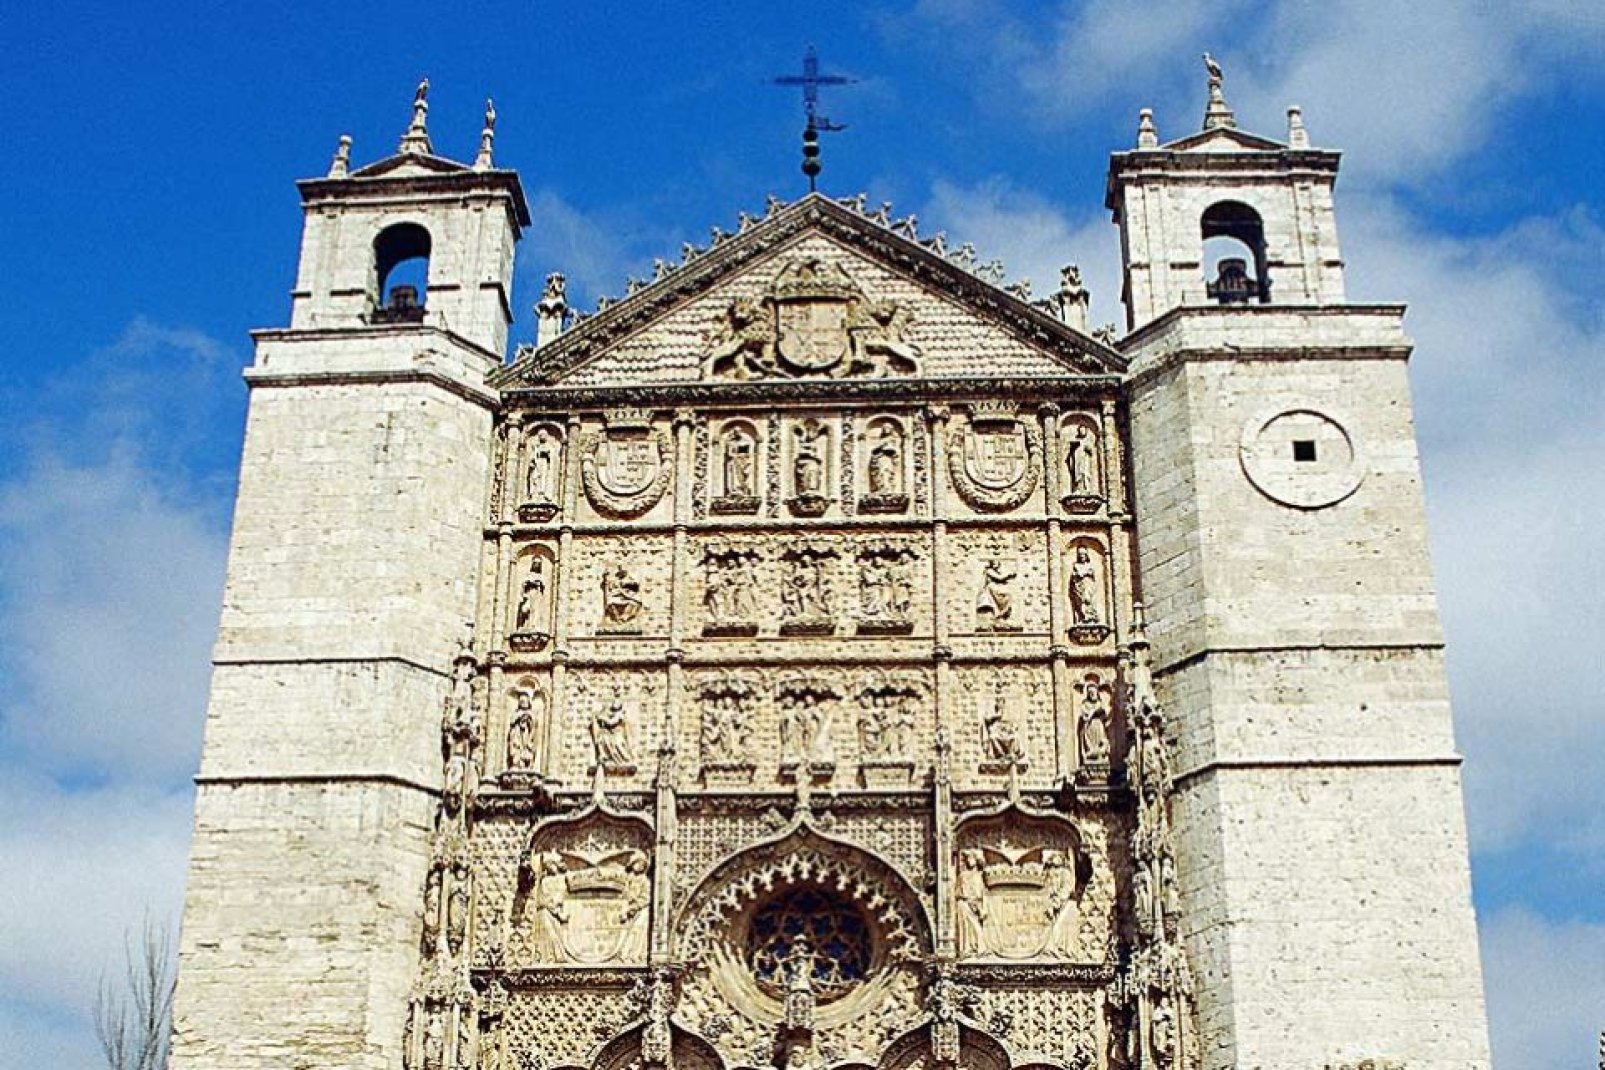 The conventual Church of San Pablo was built in the 16th century. It displays a mix of the Gothic, Isabelian and Renaissane styles.